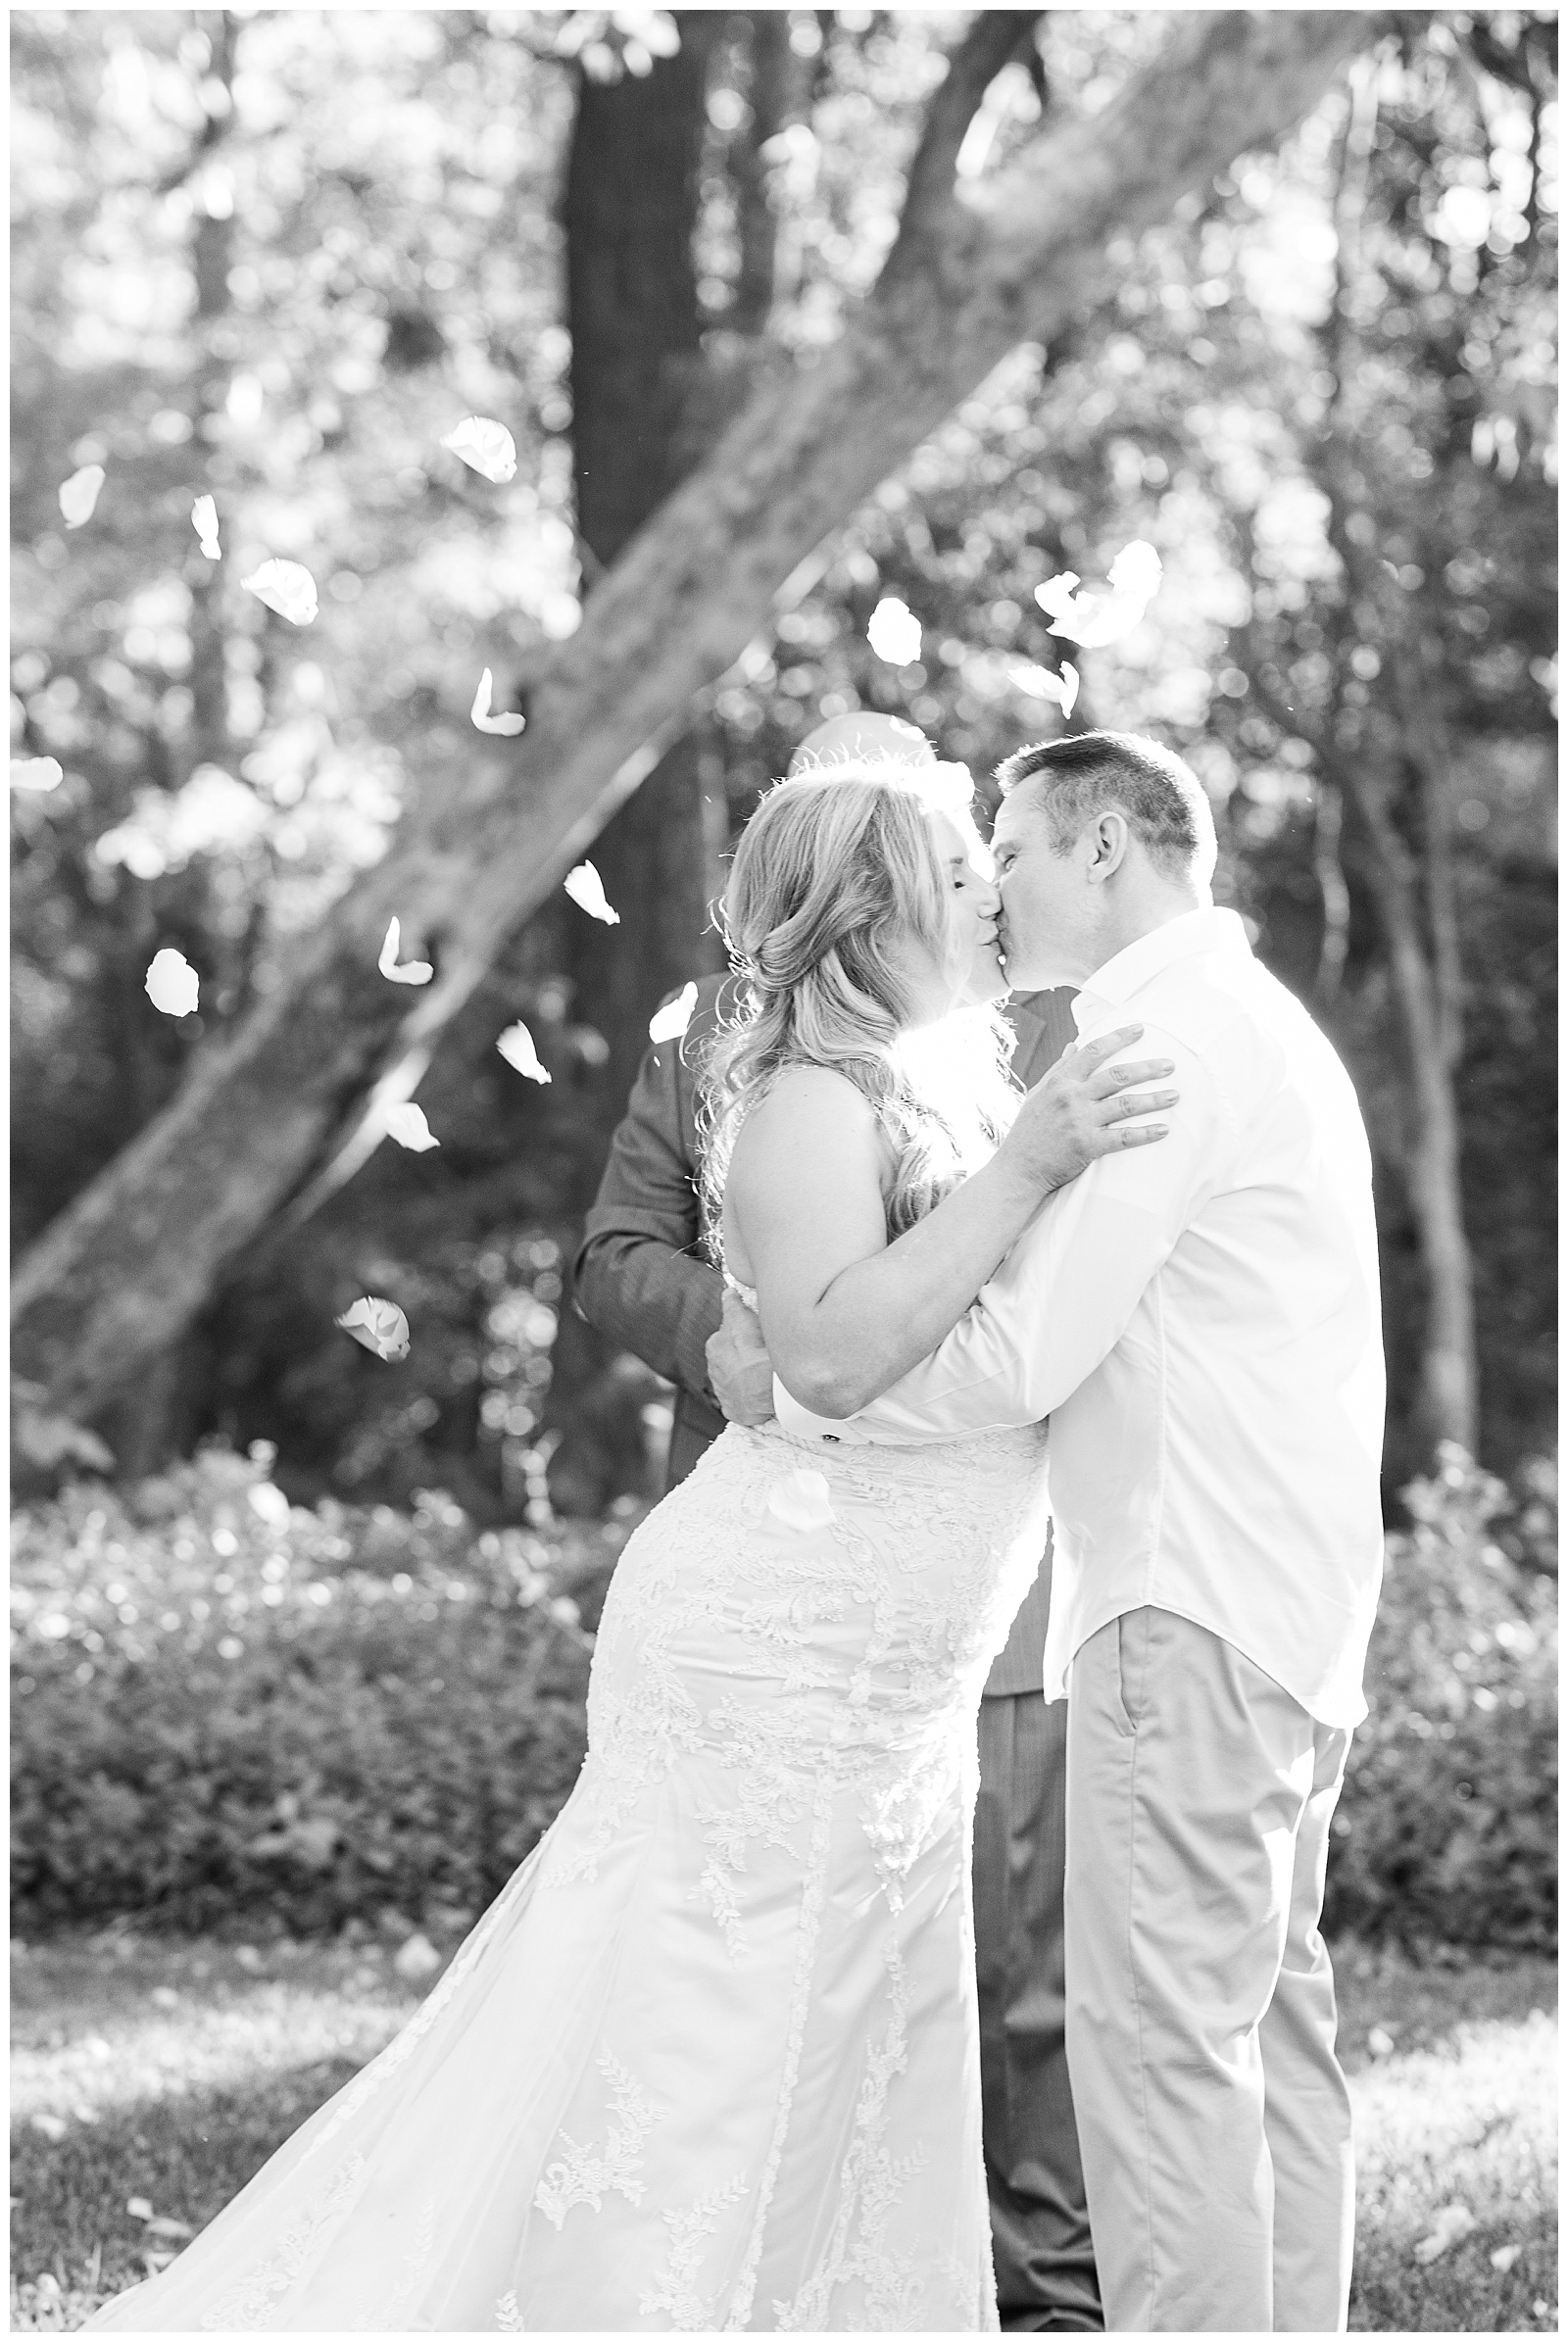 Bride and groom kiss for the first time at their intimate wedding